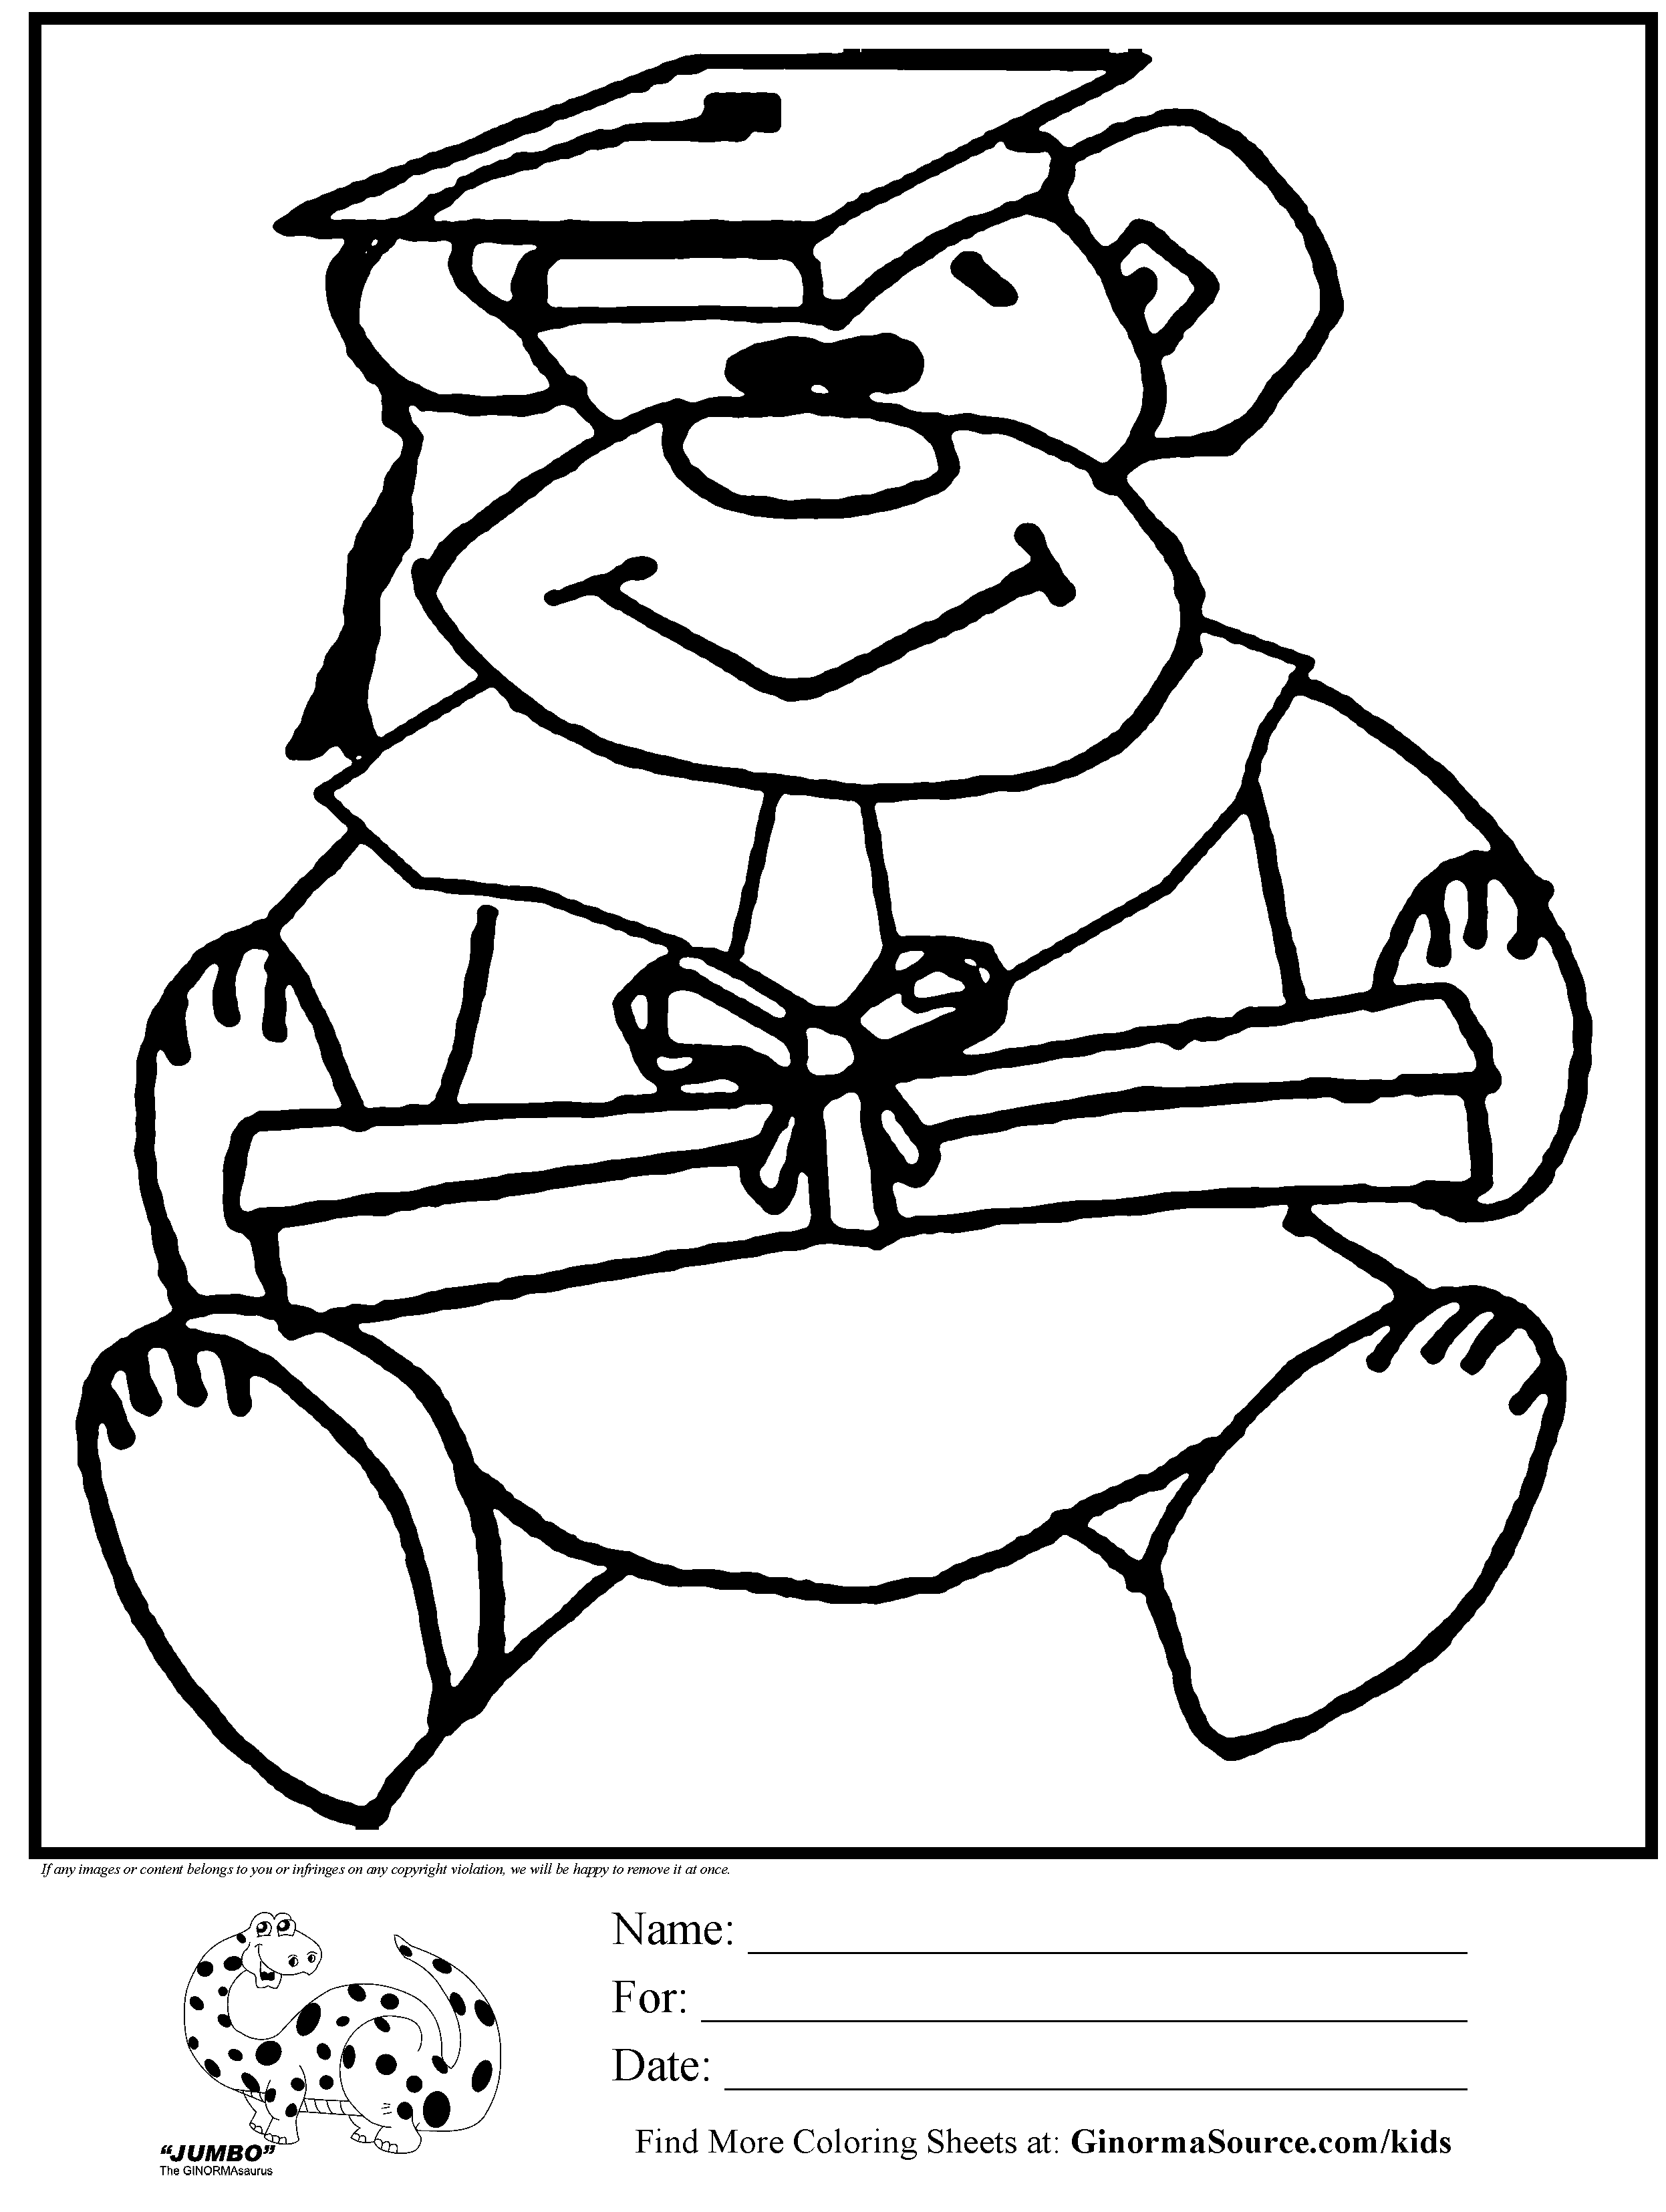 Printable Graduation Coloring Pages